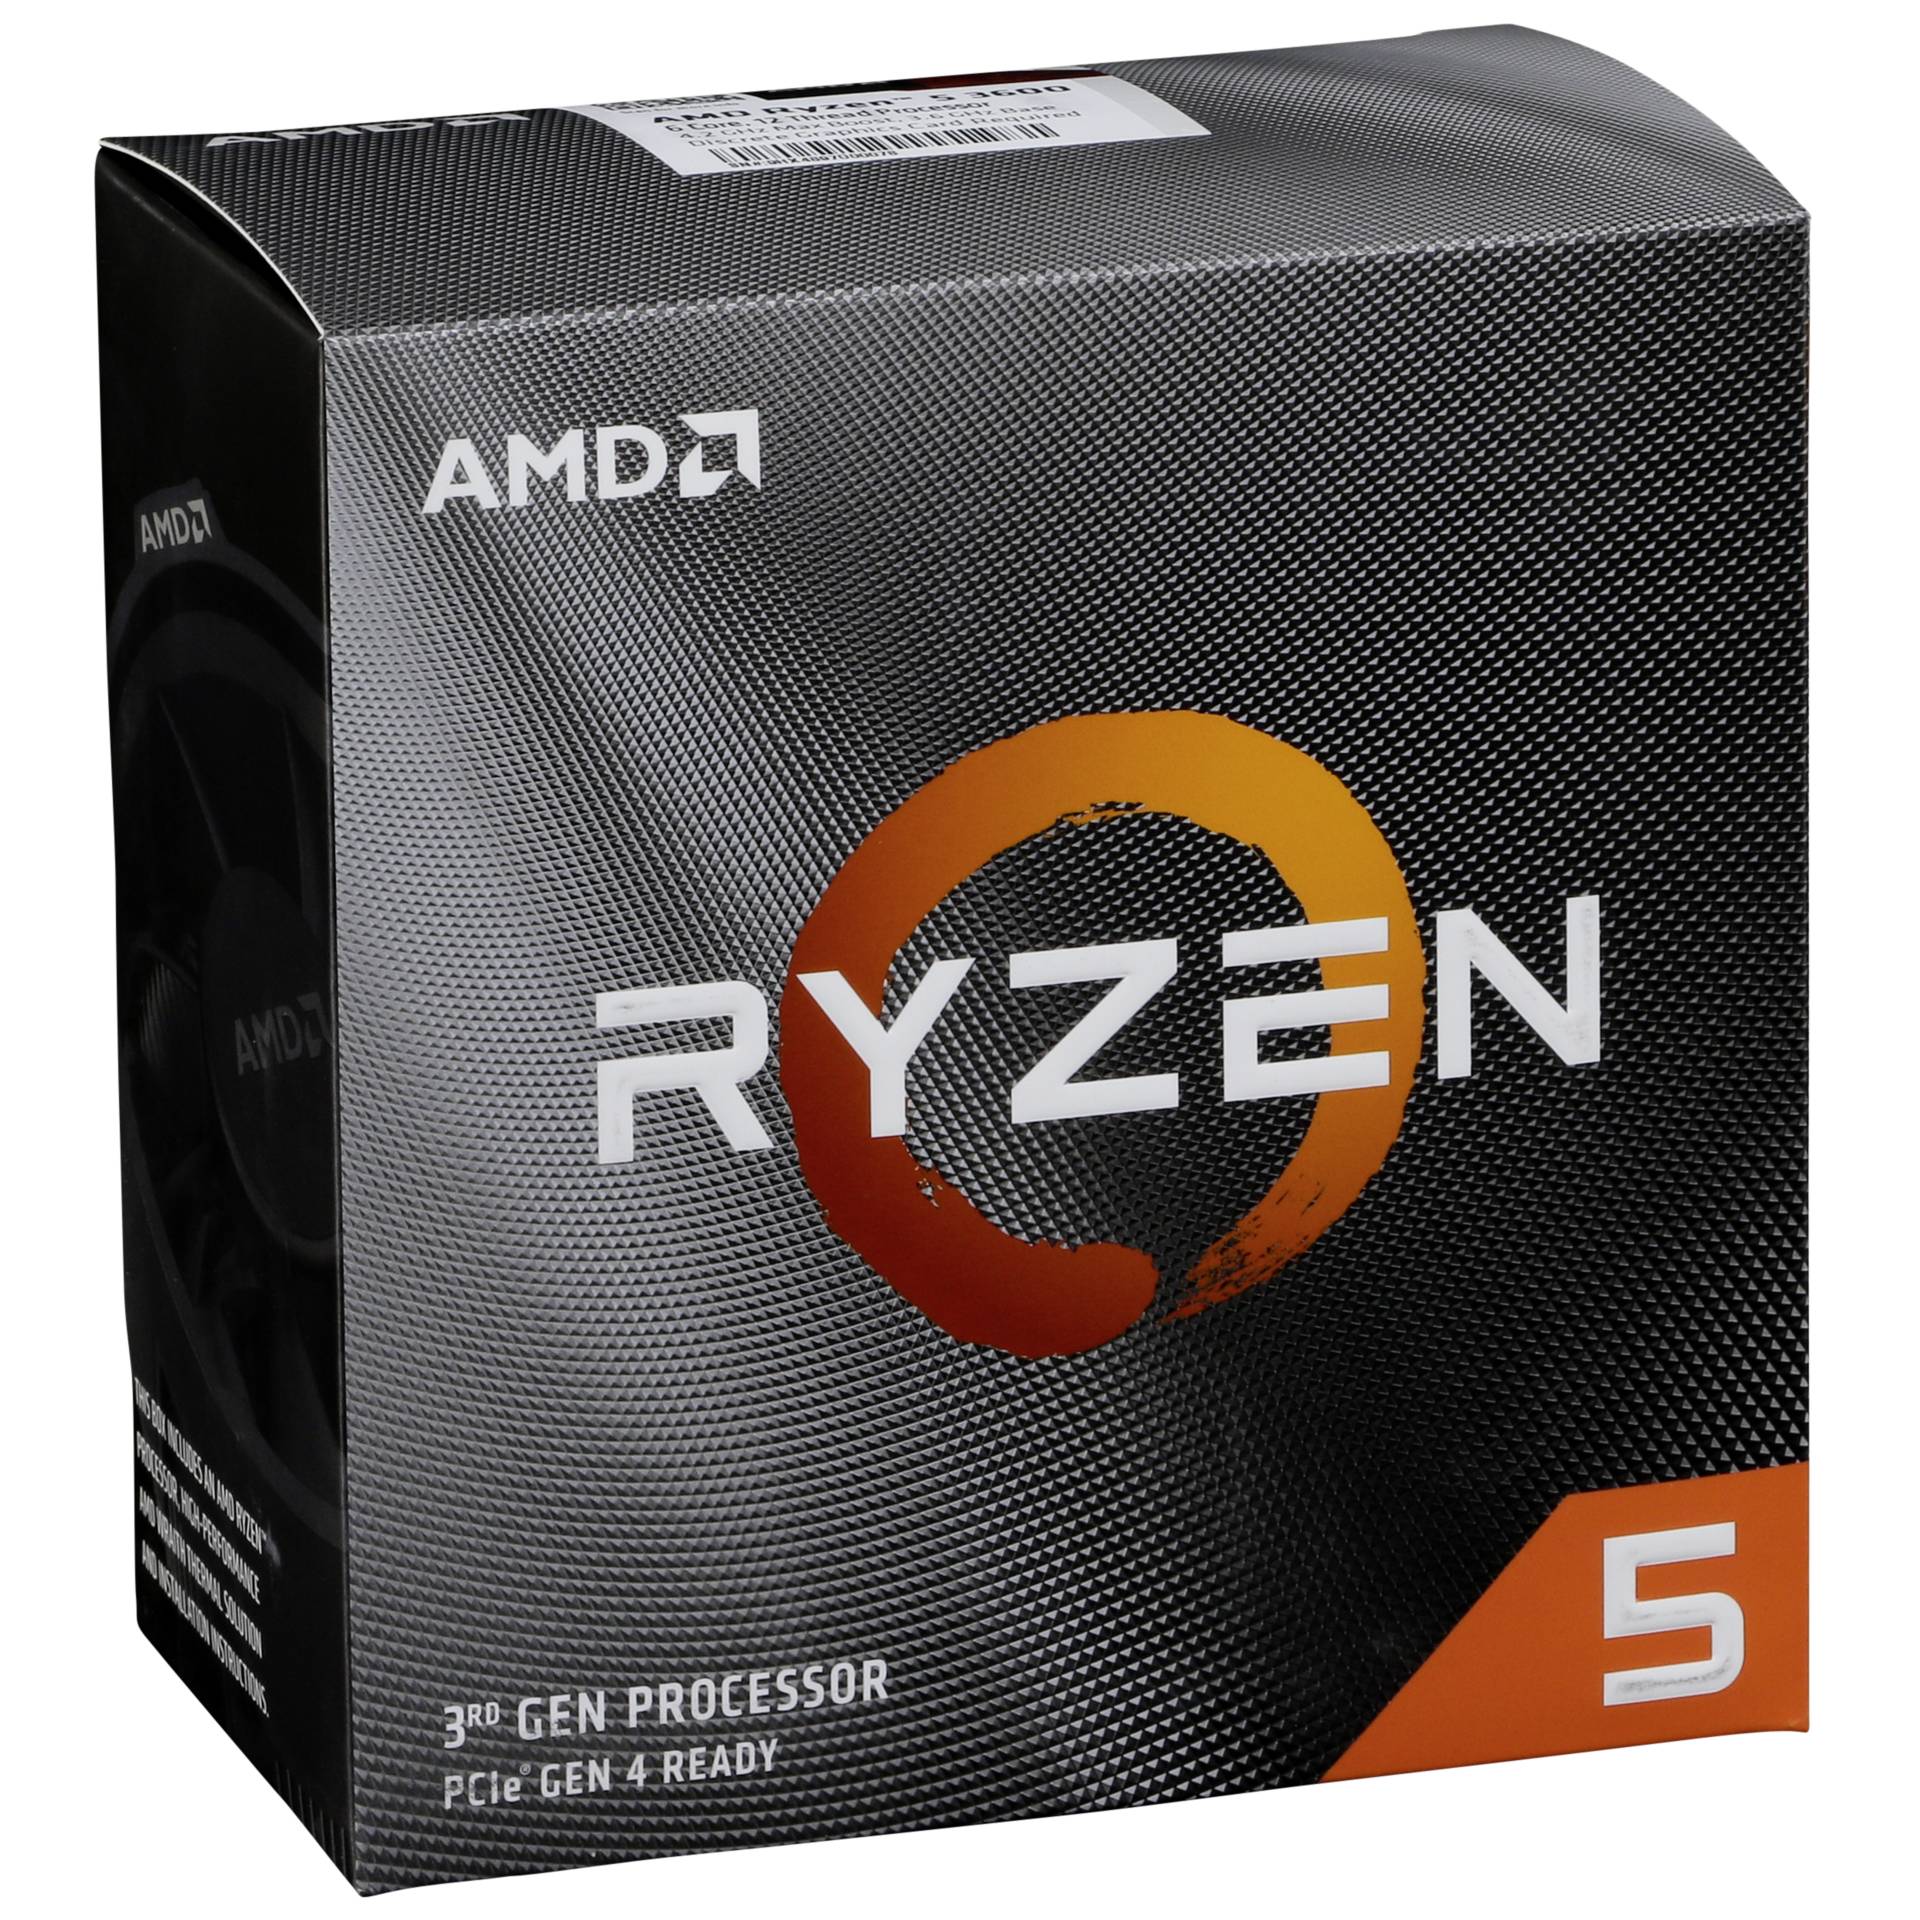 Onafhankelijk Kast ervaring Amd Gmbh -AMD AM4 Ryzen 5 6 Core Box 3600 3,6 GHz MAX Boost 4,2GHz 6xCore  32MB 95W with Wraith Stealth Cooler 7nm -Amd Gmbh Hardware/Electronic  Grooves.land/Playthek